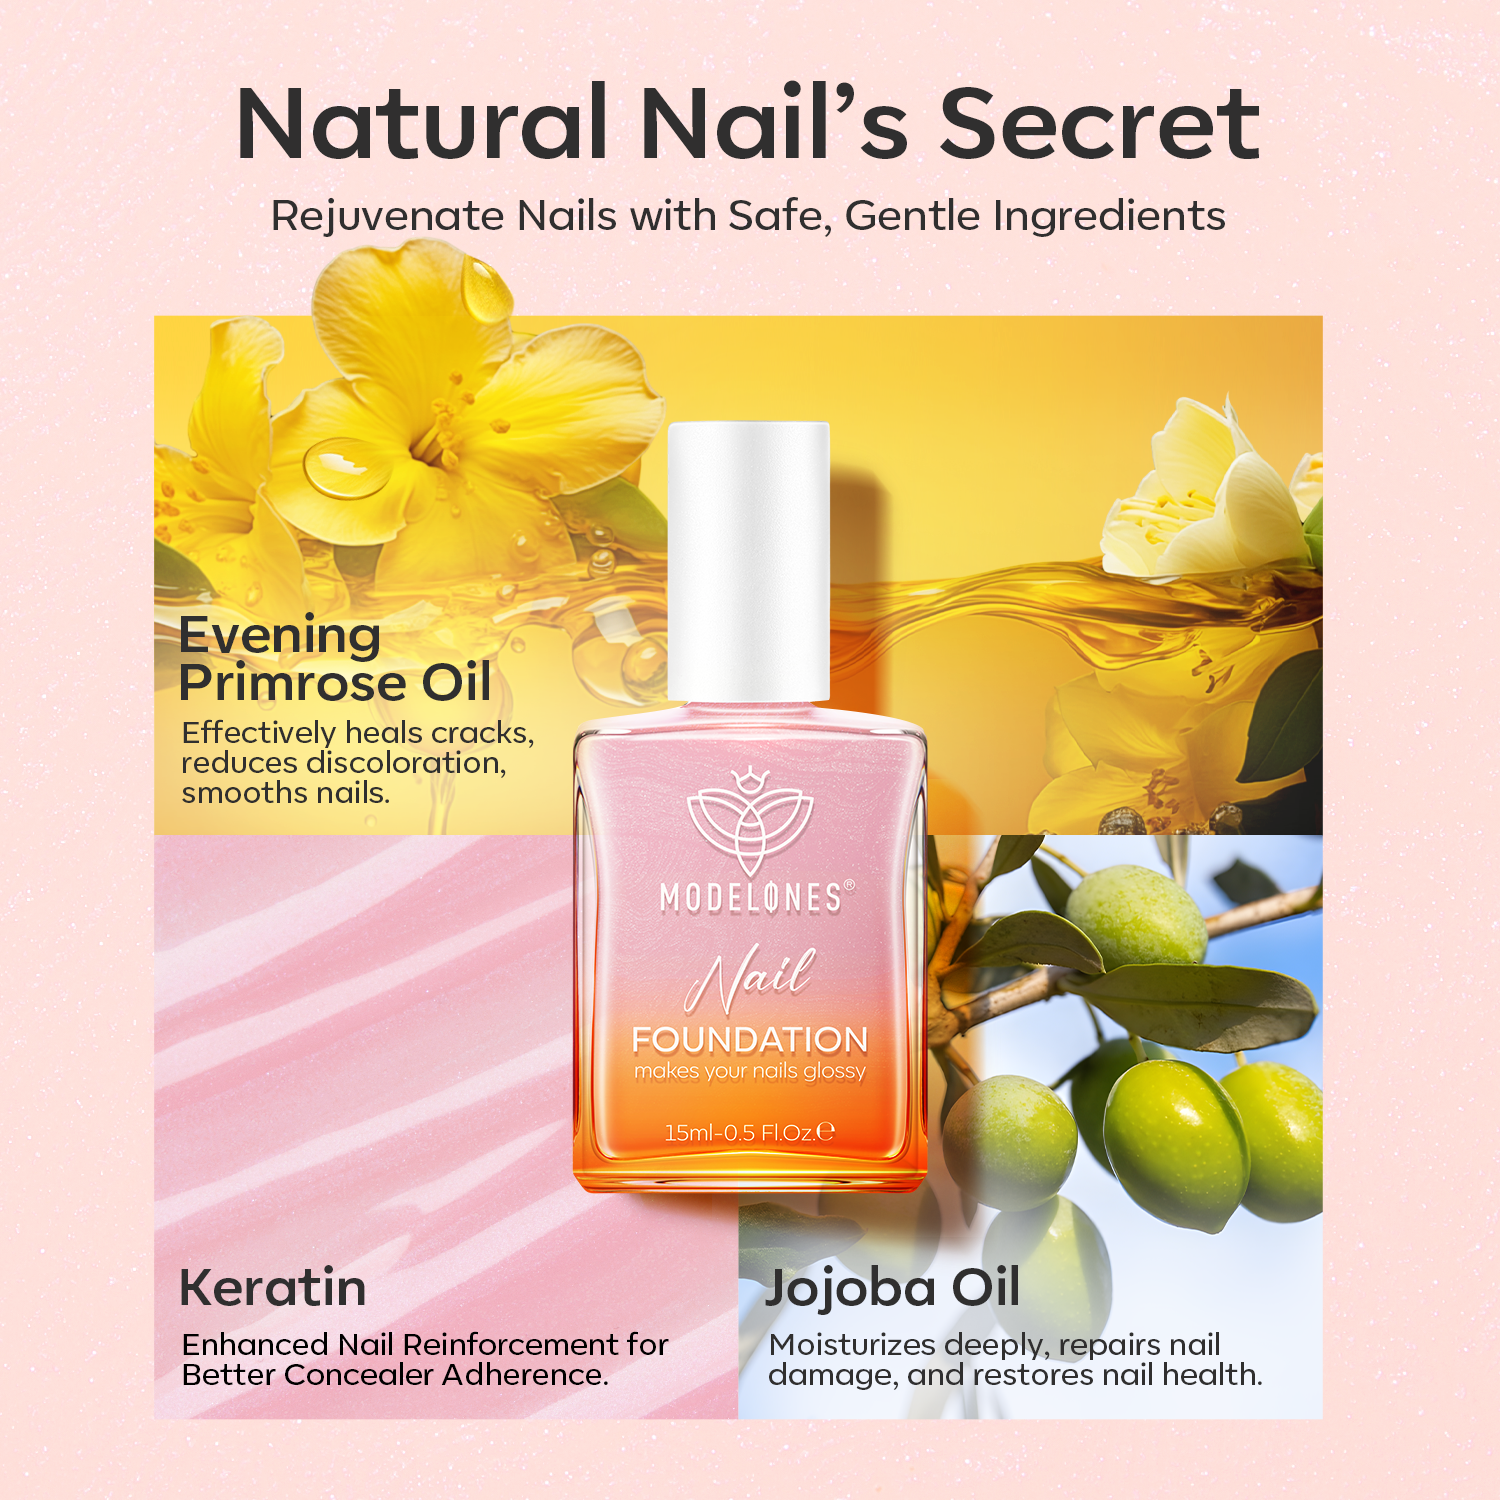 Nail Foundation Set with Top Coat & Cuticle Oil - Sparkle Pink【US/EU ONLY】